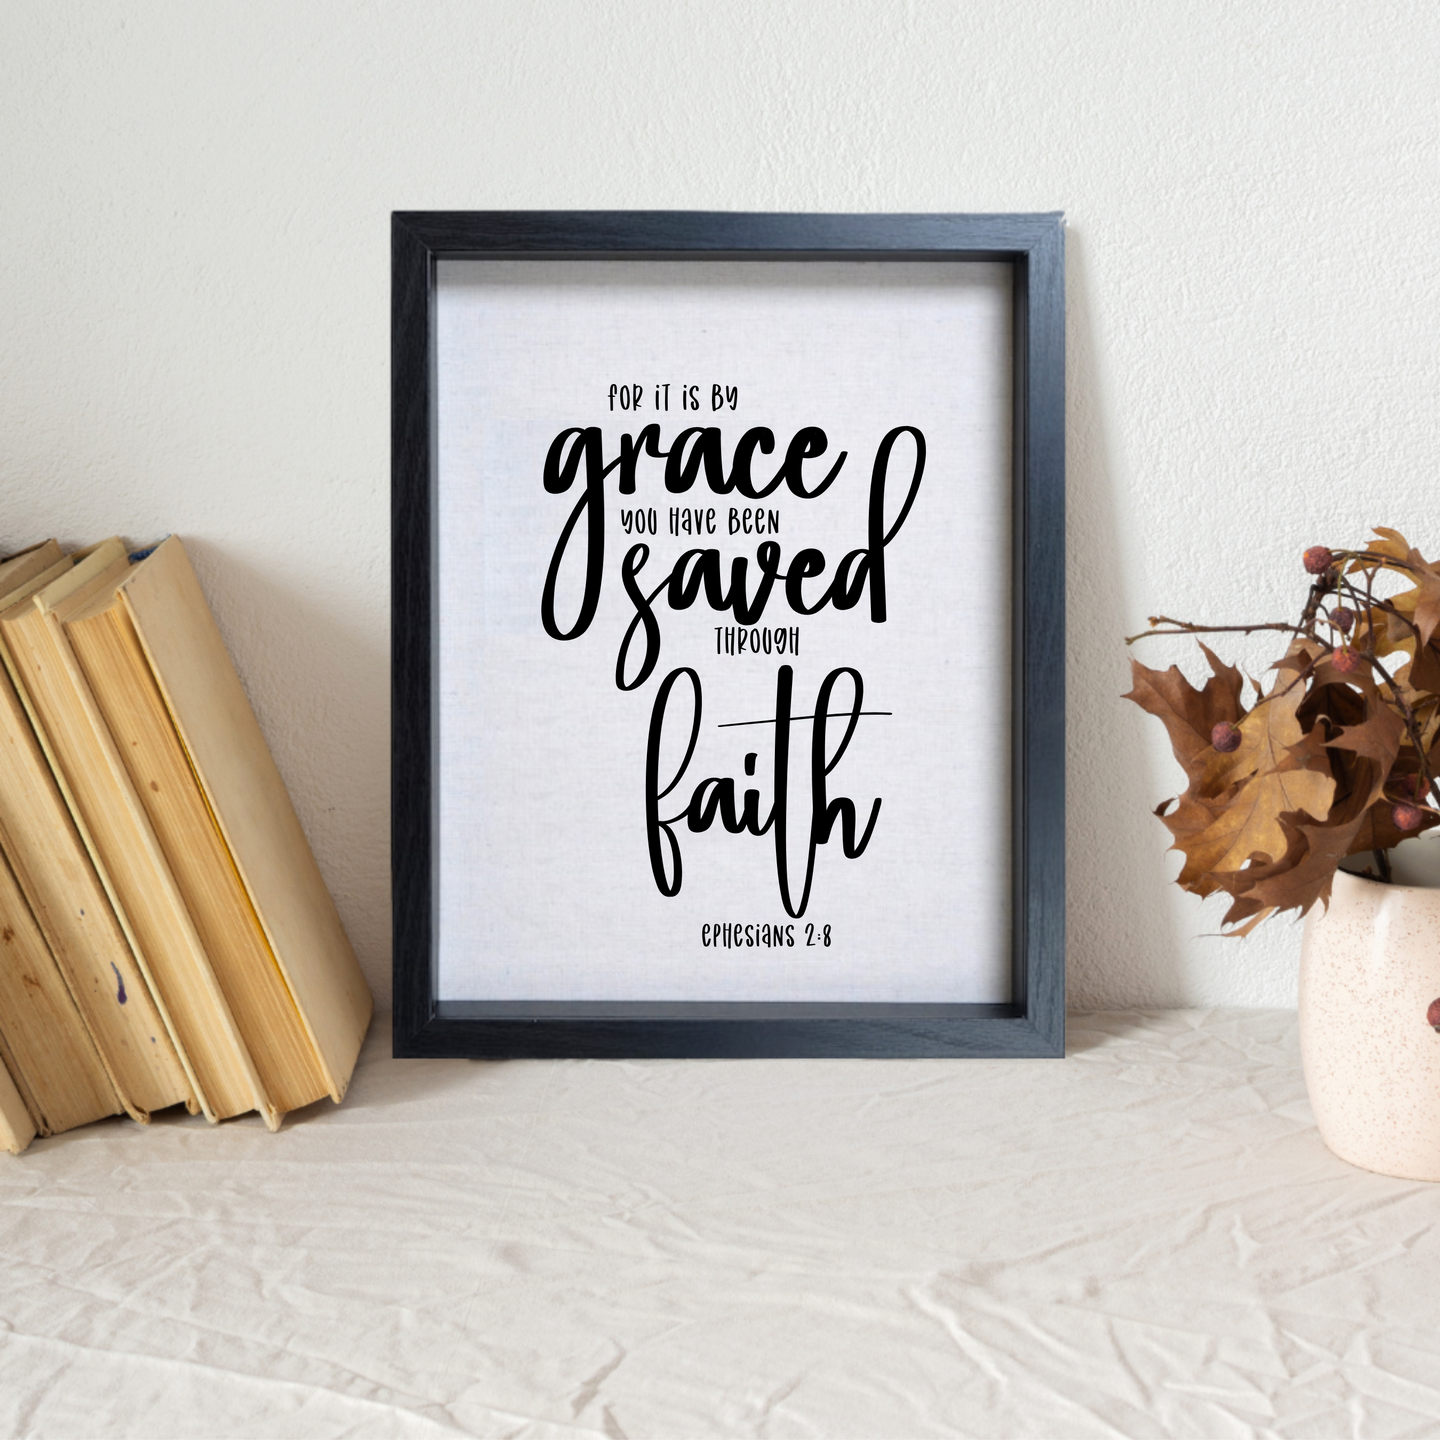 For by grace you have been saved through faith - Ephesians 2:8 - Hanging or Sitting Artwork- 11X14